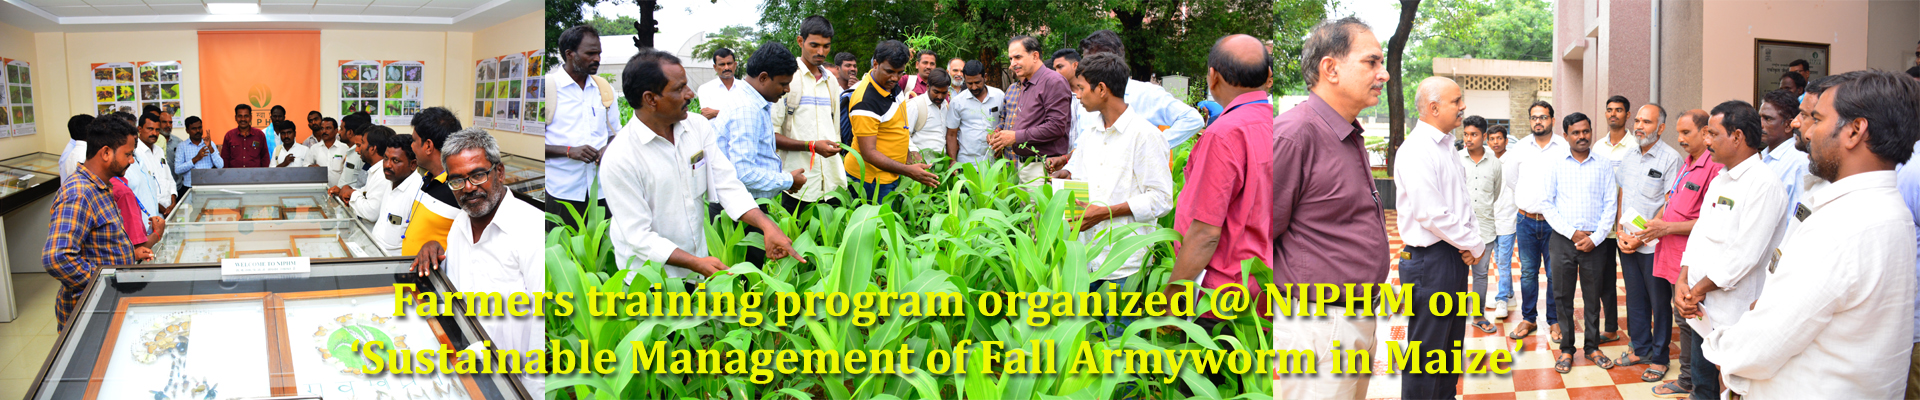 Farmers training program organized @ NIPHM on ‘Sustainable Management of Fall Armyworm in Maize’